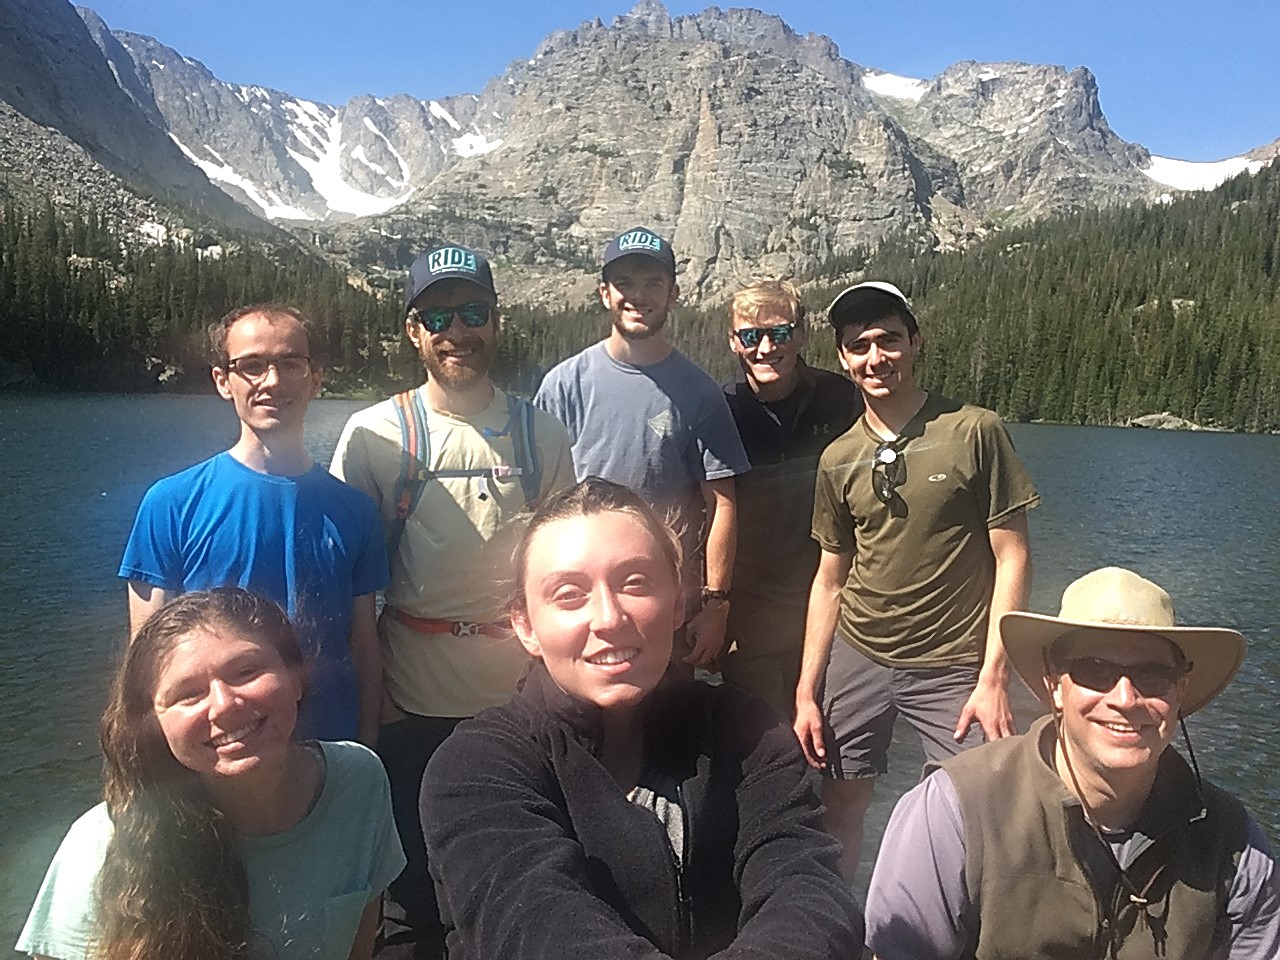 The Weber group at the Loch. From left, back row: Wyatt Zagorec-Marks, Curtis Beimborn, Luke Walther, Patrick Yehle, Kenneth Wilson. From left, front row: Rebecca Hirsch, Madison Foreman, JMW.